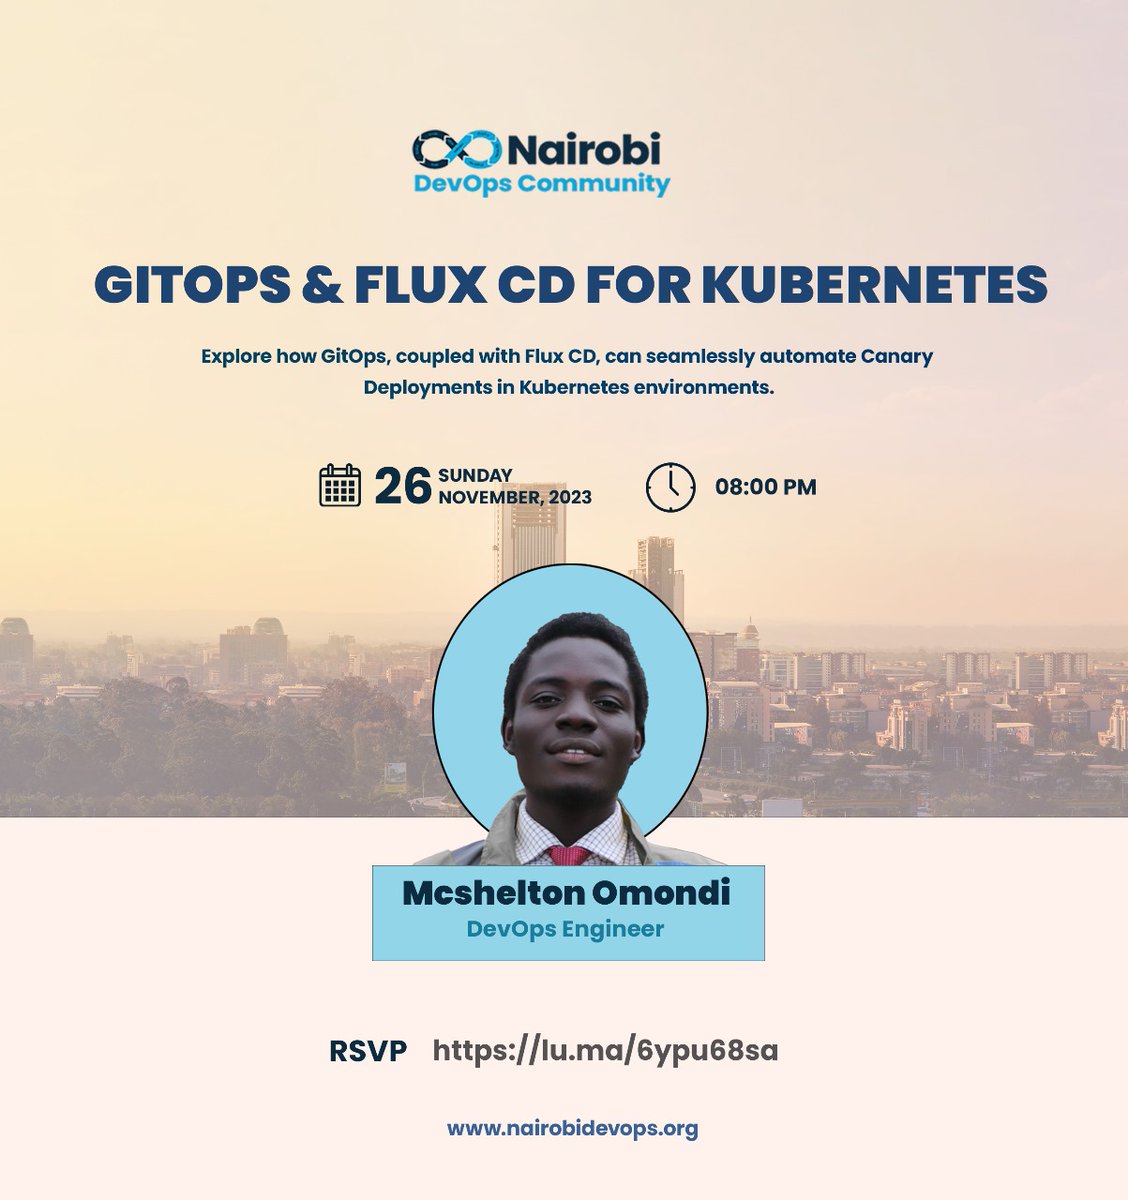 Join us this Sunday, 26th November 2023 at 8pm for an insightful session on GitOps and FluxCD for Kubernetes. 

The session will be facilitated by @McSheltonOmondi.

RSVP: lu.ma/6ypu68sa

#nairobi #devops #community #kenya #nairobidevops #gitops @fluxcd @kubernetesio